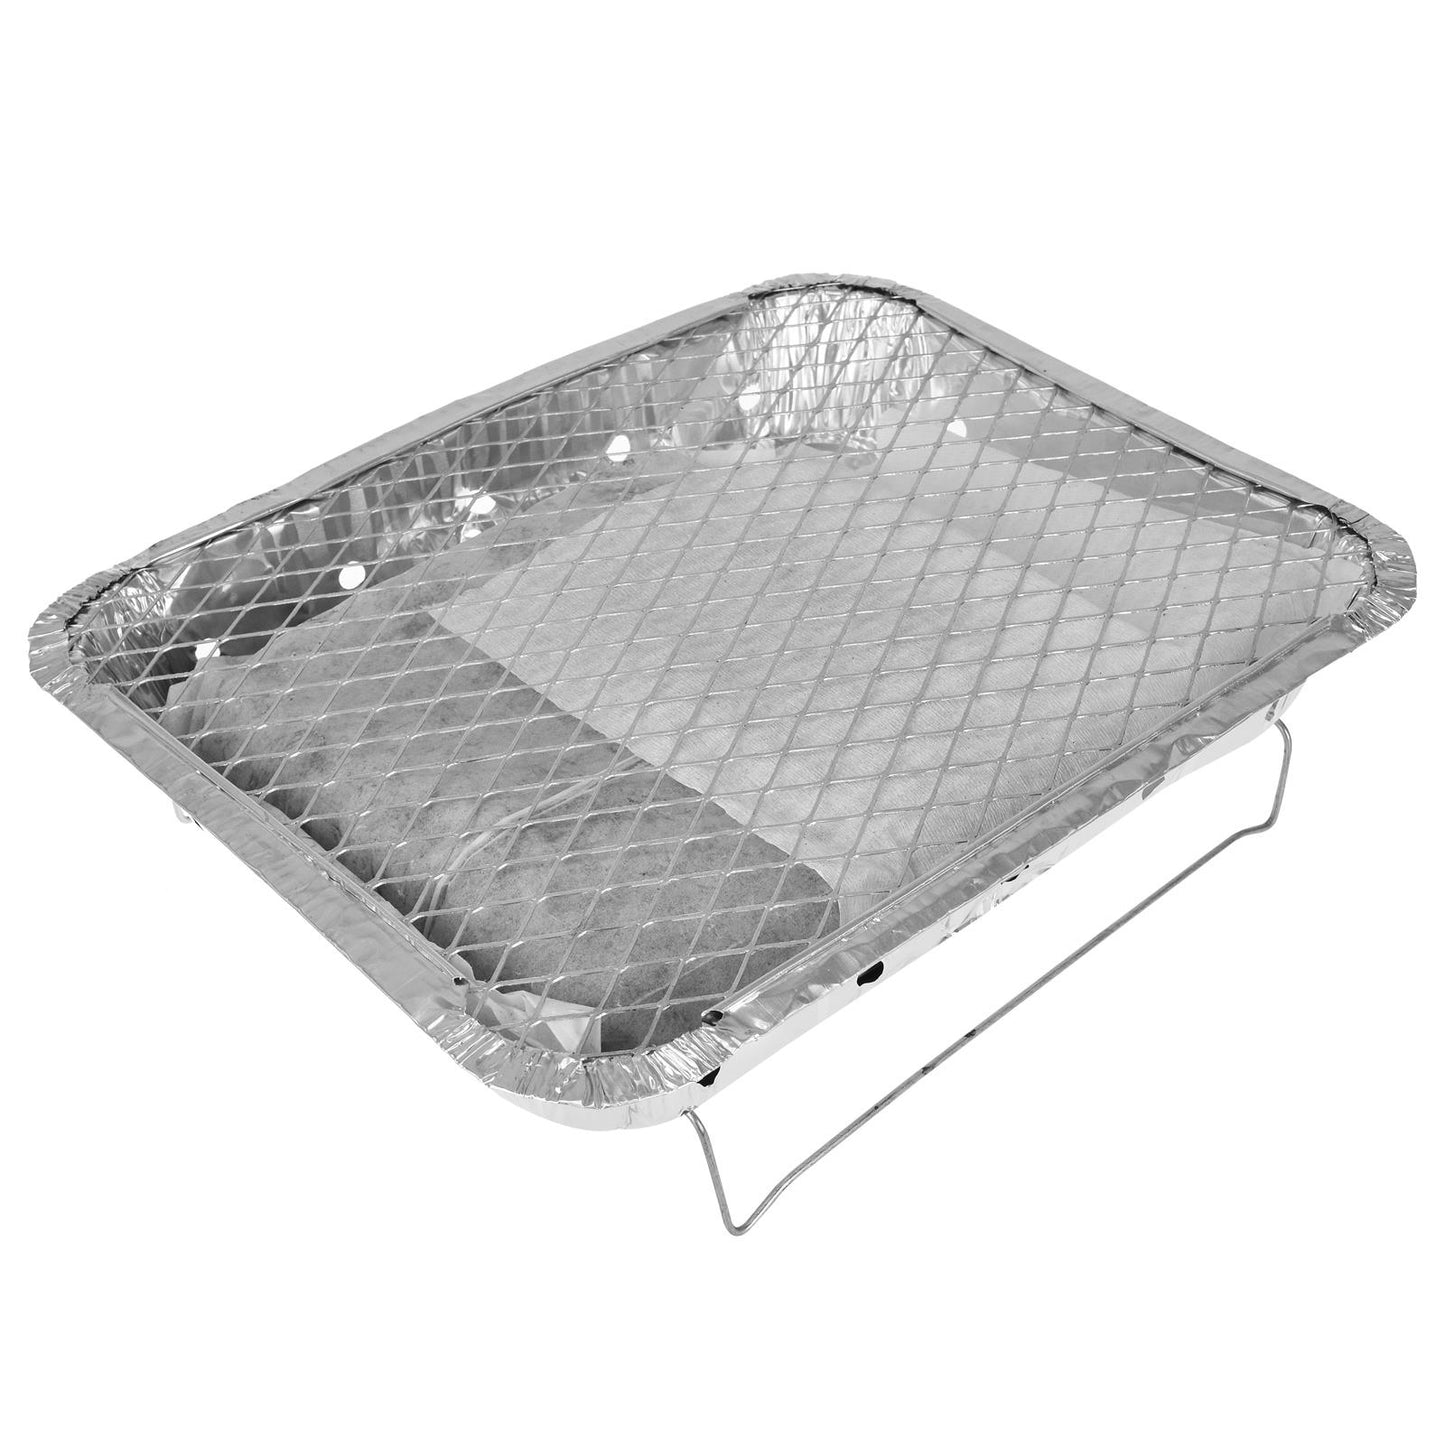 Enjoy a BBQ Anywhere with an Instant Disposable Grill Tray